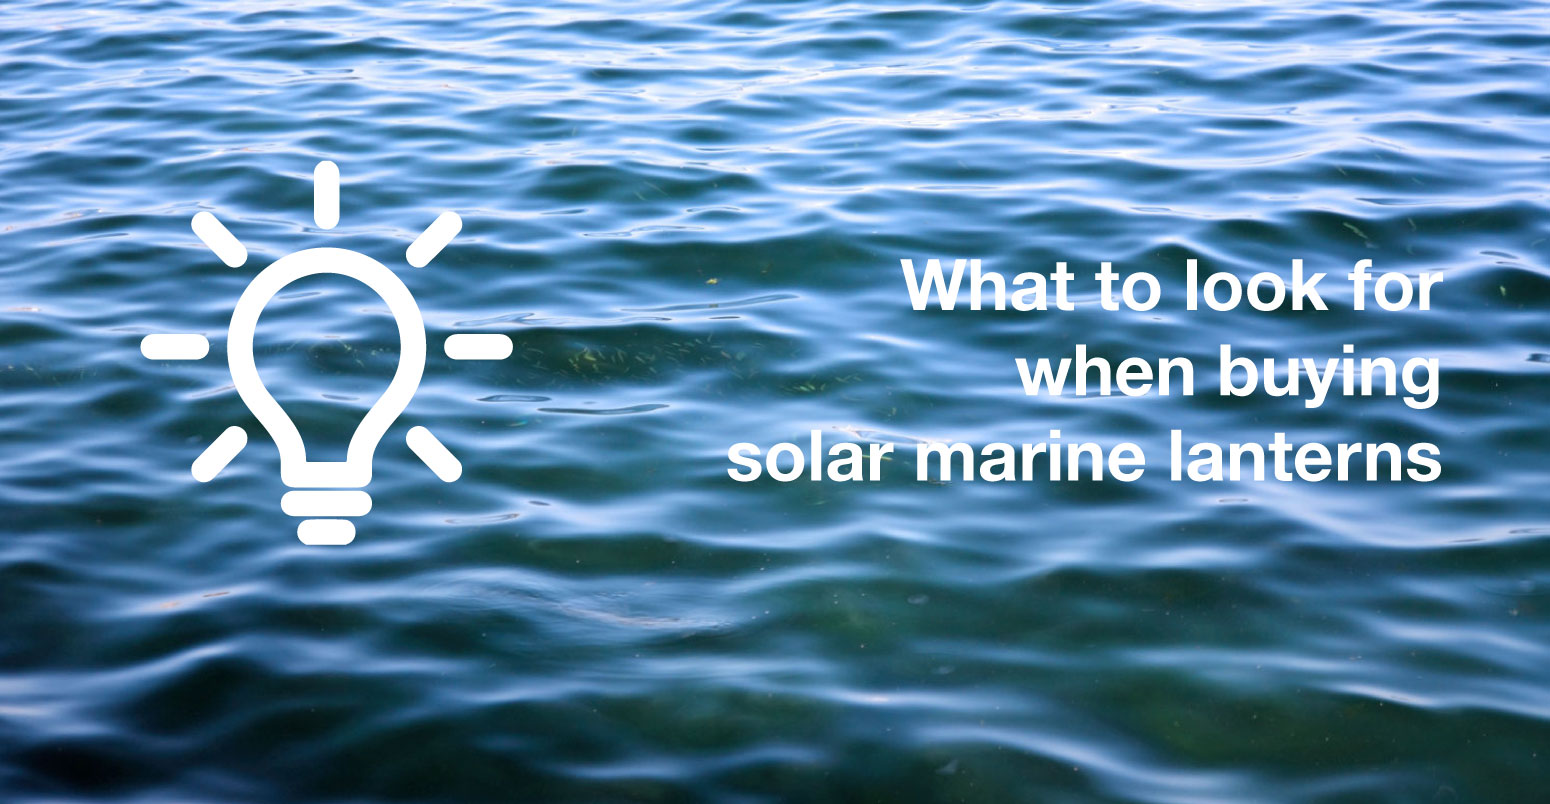 What to look for when buying solar marine lanterns